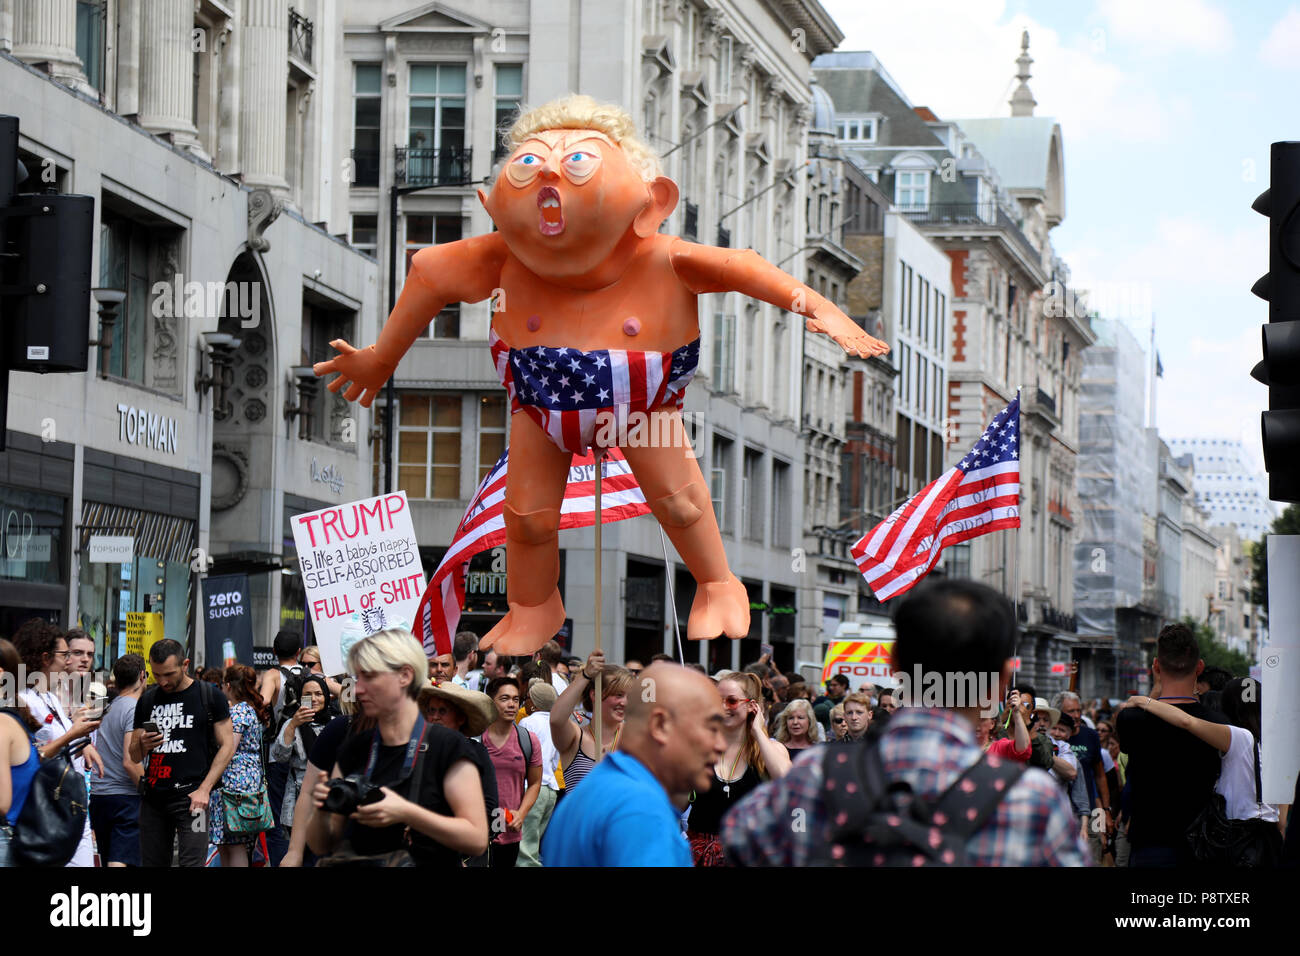 London, UK – July 13, 2018: An effigy of US president Donald Trump is help up by protesters involved in an anti-Trump march in central London, during his visit to the UK. Credit: Dominic Dudley/Alamy Live News Stock Photo